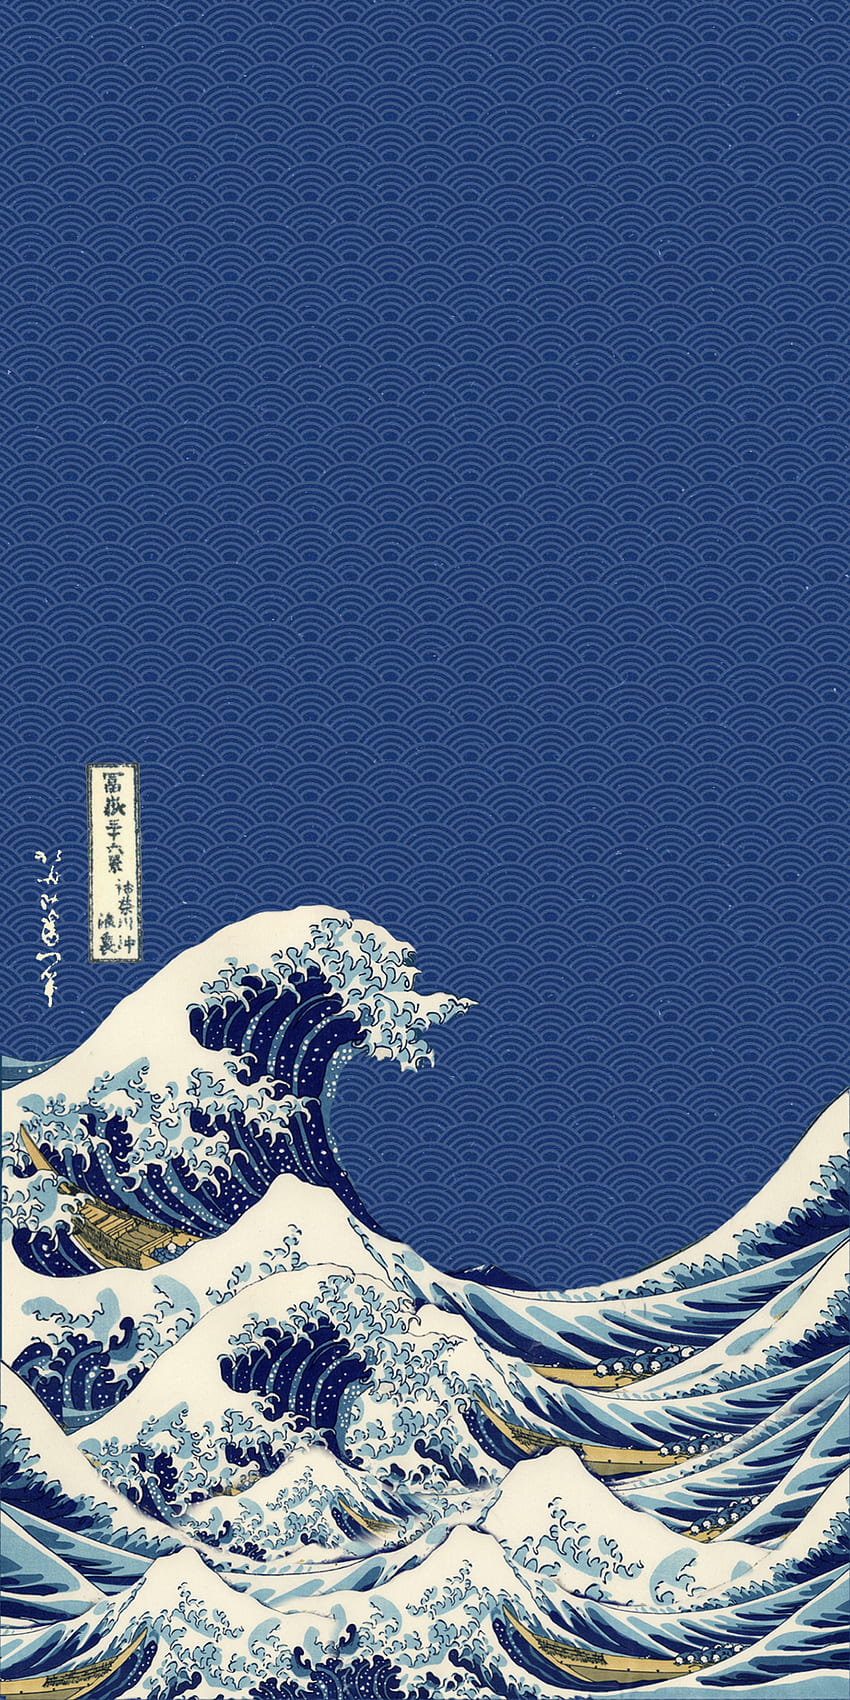 A phone wallpaper of a painting of a wave - Wave